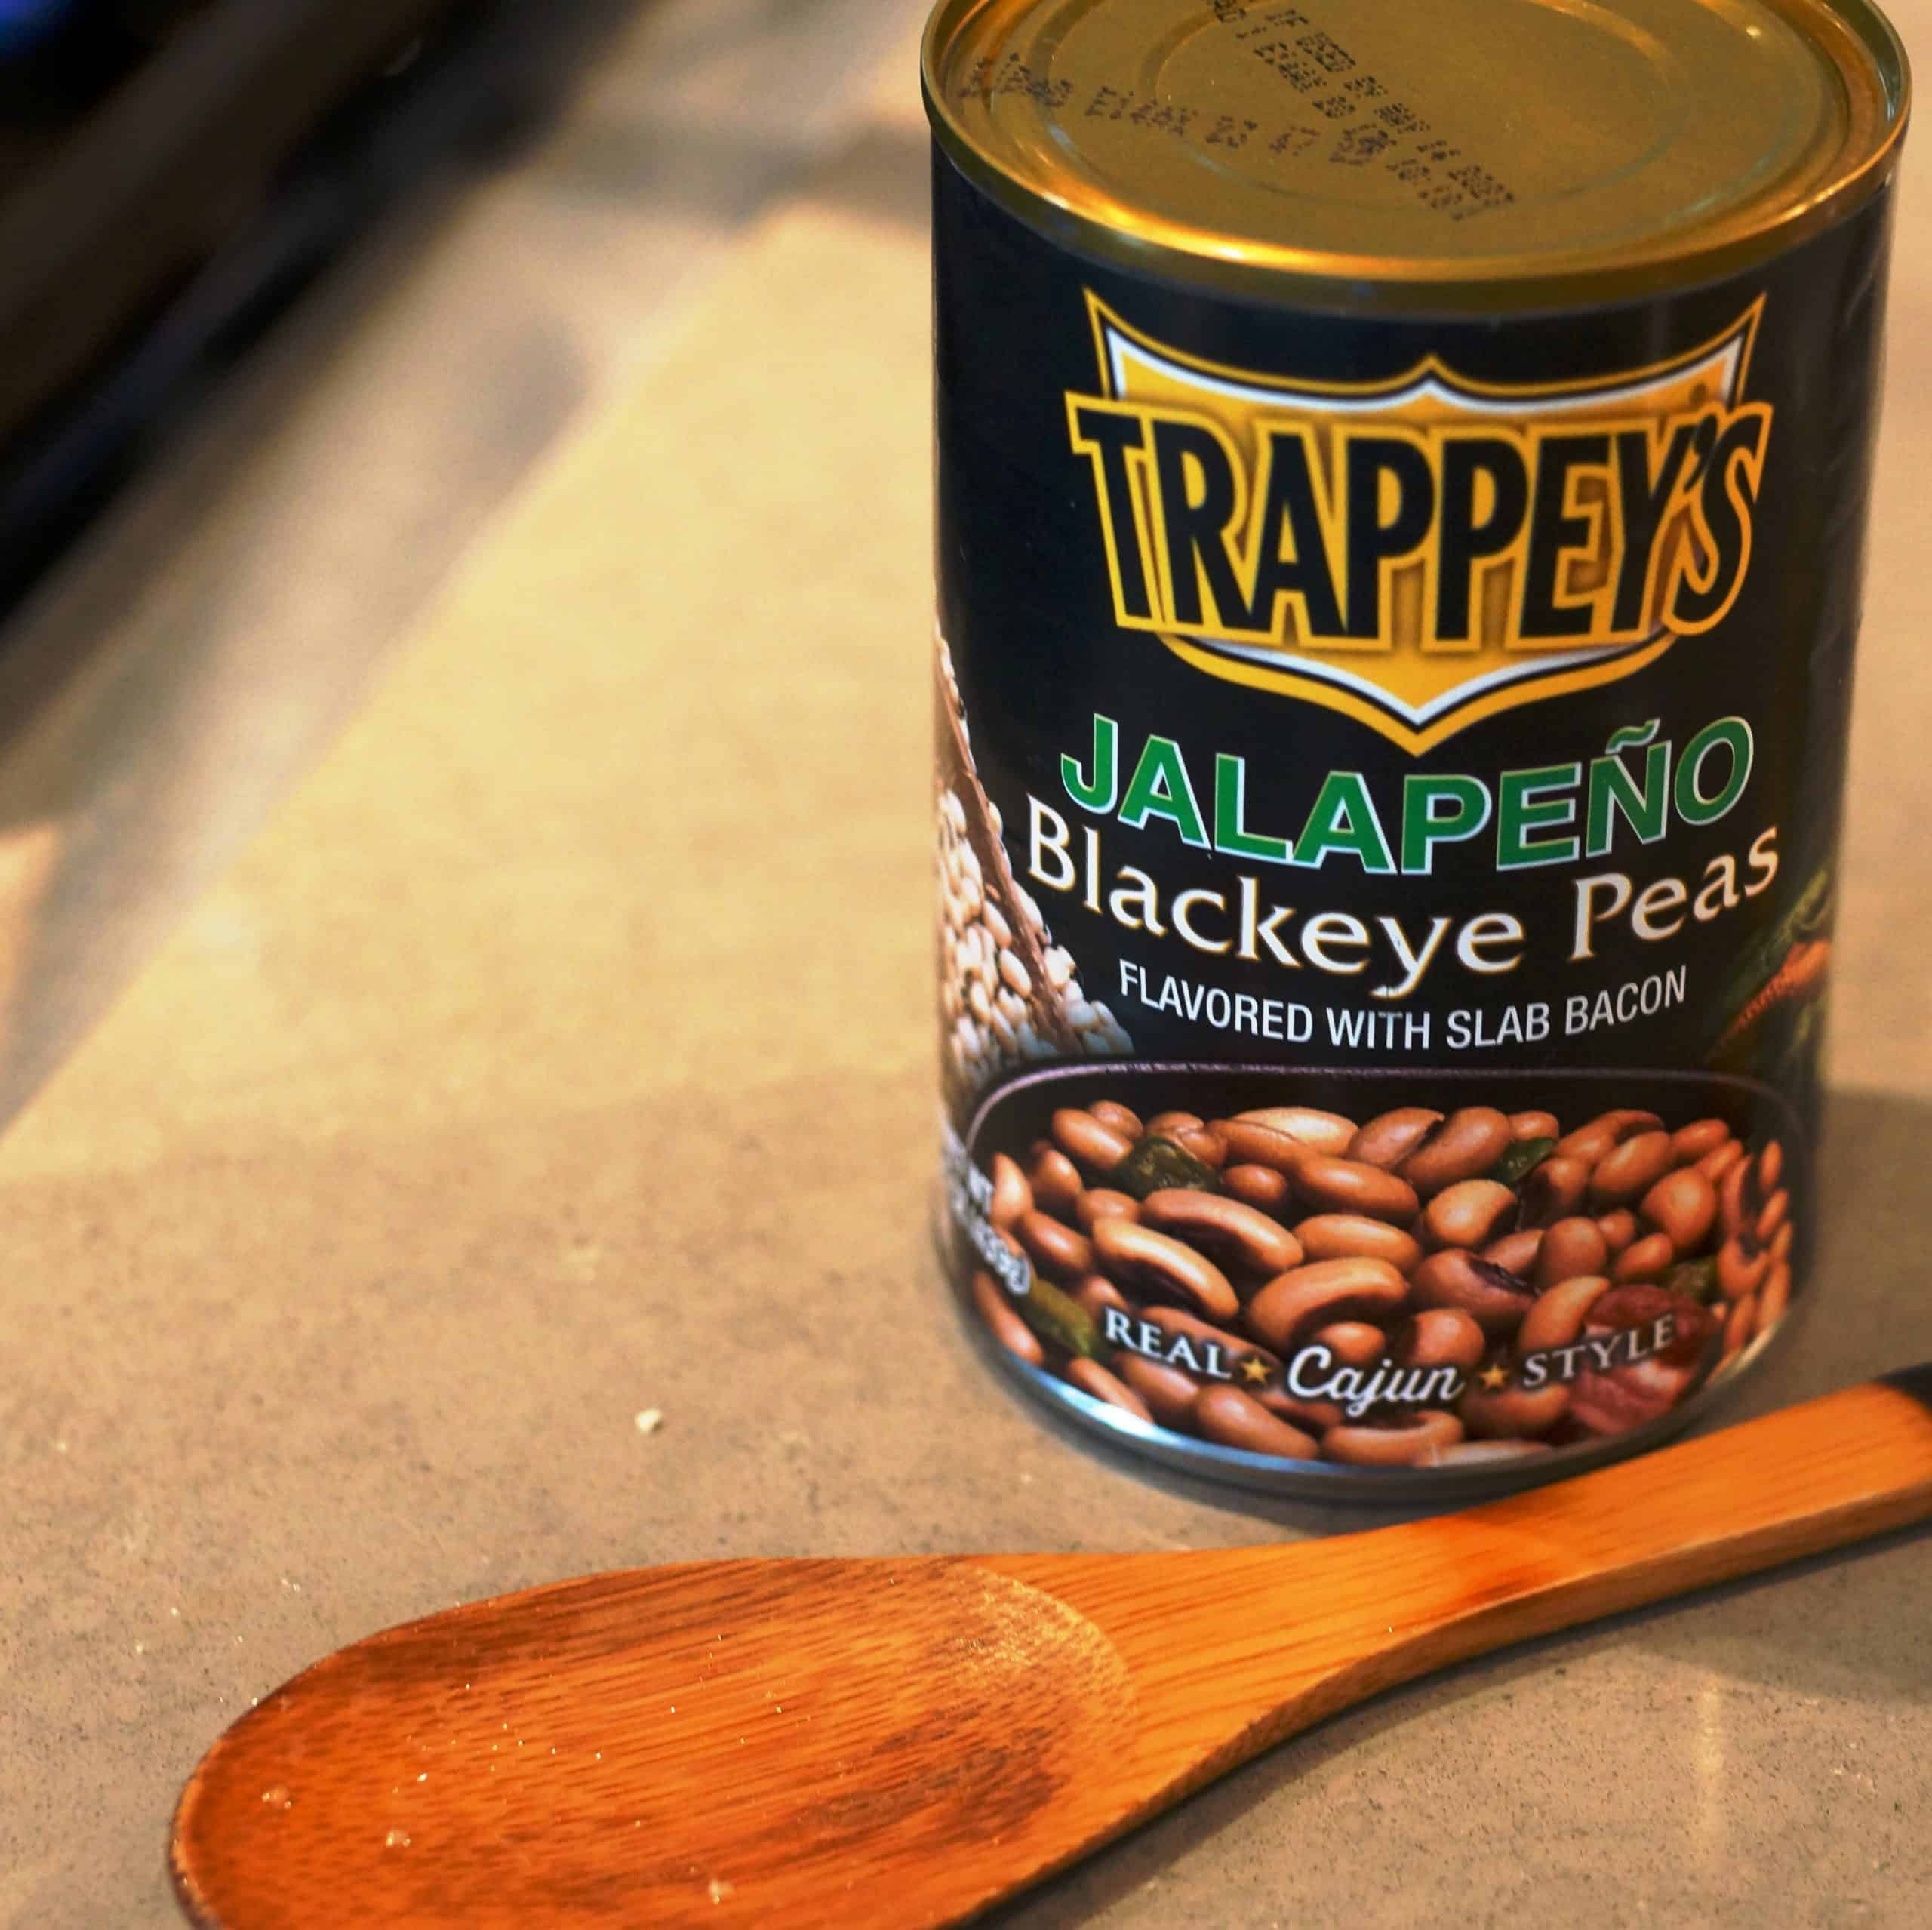 Can of Trappey's Jalapeno Blackeye Peas.